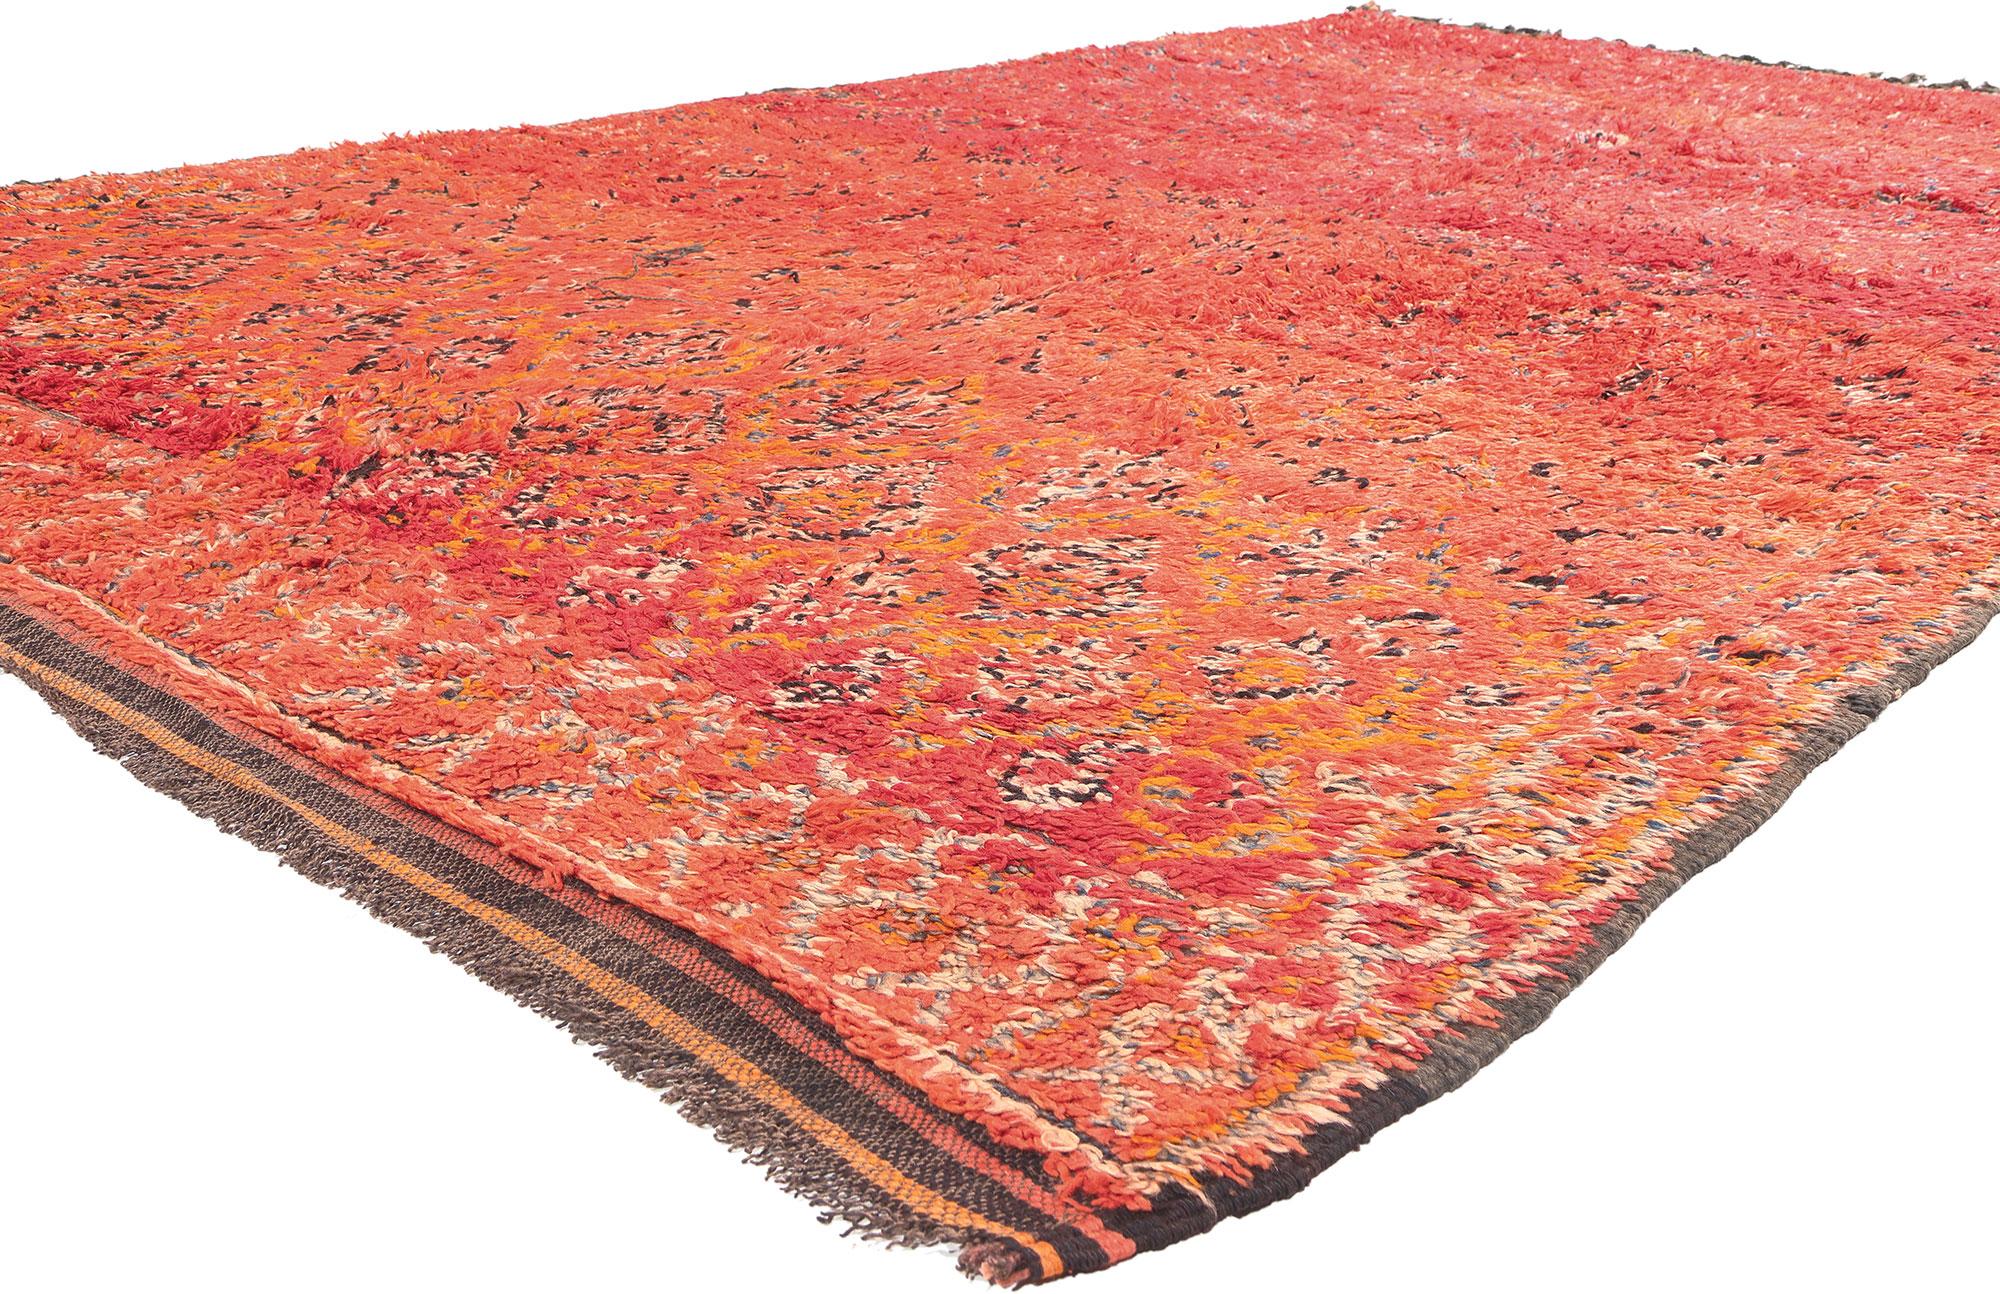 20148 Vintage Beni MGuild Moroccan Rug, 06'08 x 11'06.

In the vibrant realm of style, the hand-knotted wool vintage Beni MGuild Moroccan rug effortlessly blends bold bohemian aesthetics with a dash of spicy global flair. Its detailed diamond design